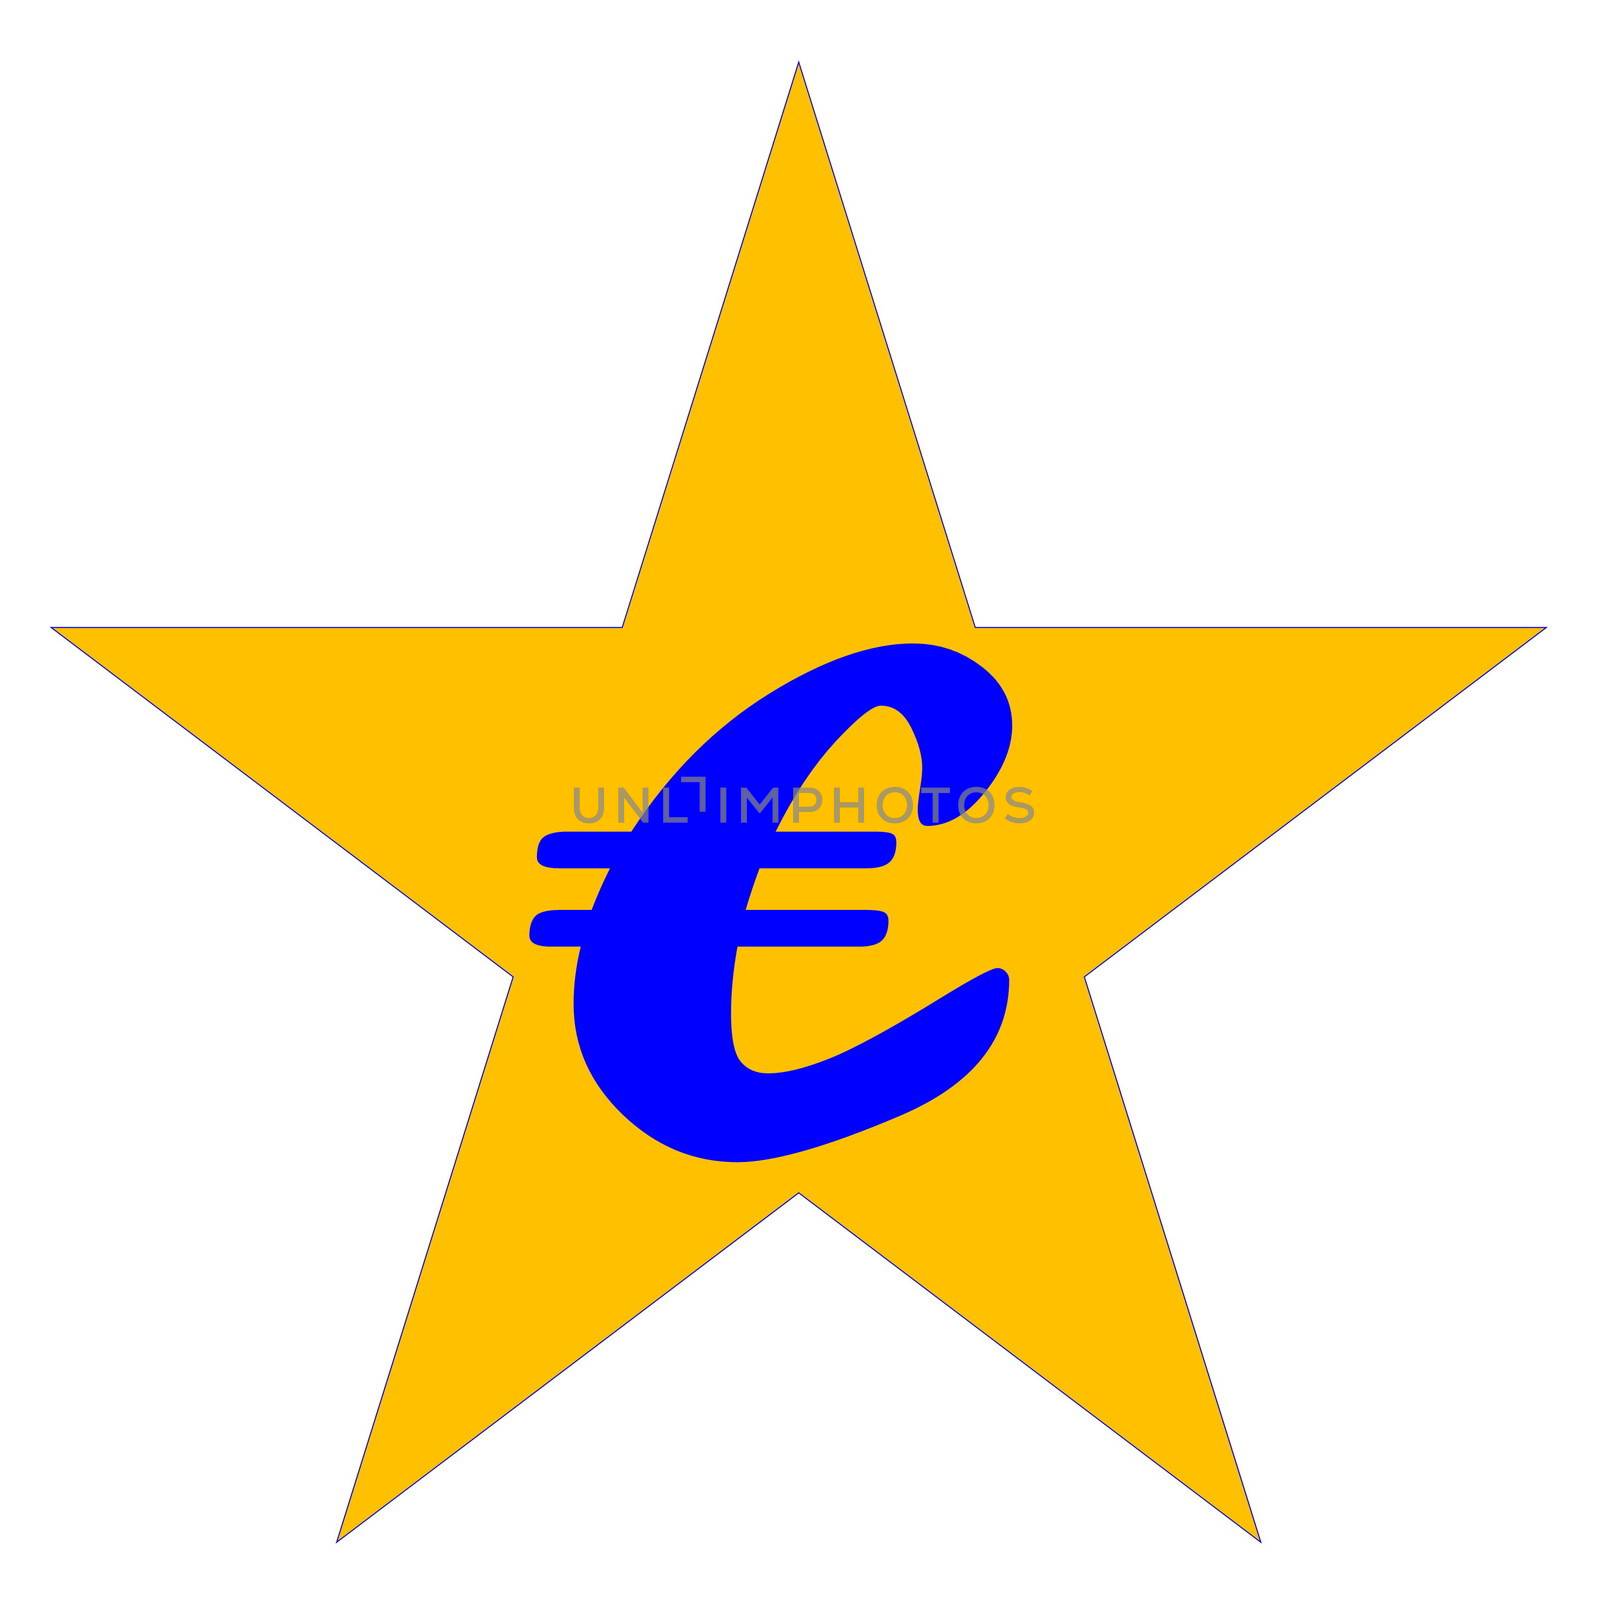 Blue euro symbol into yellow star in white background